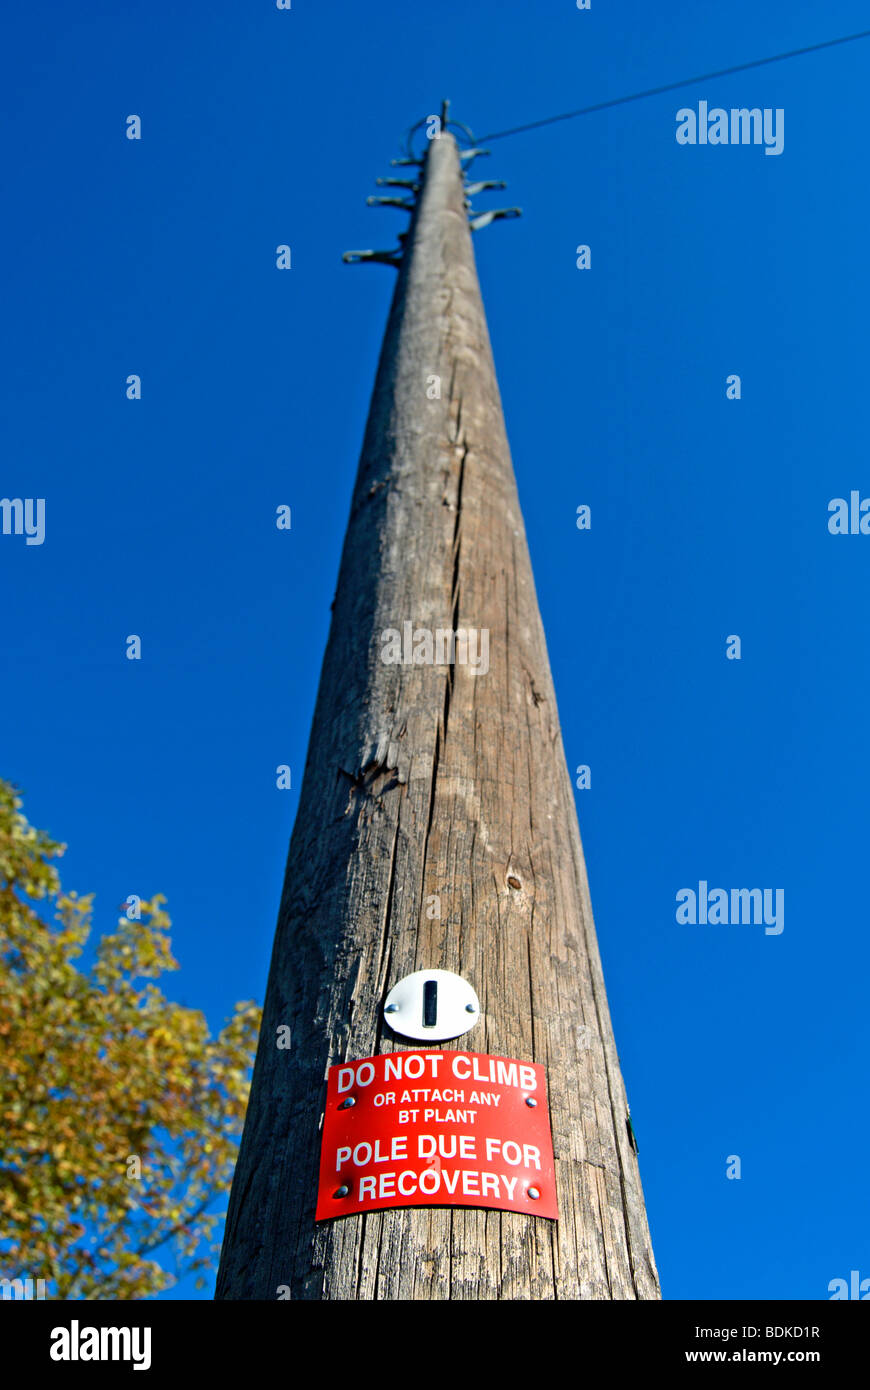 british wooden telegraph pole with do not climb sign and pole due for recovery notice Stock Photo